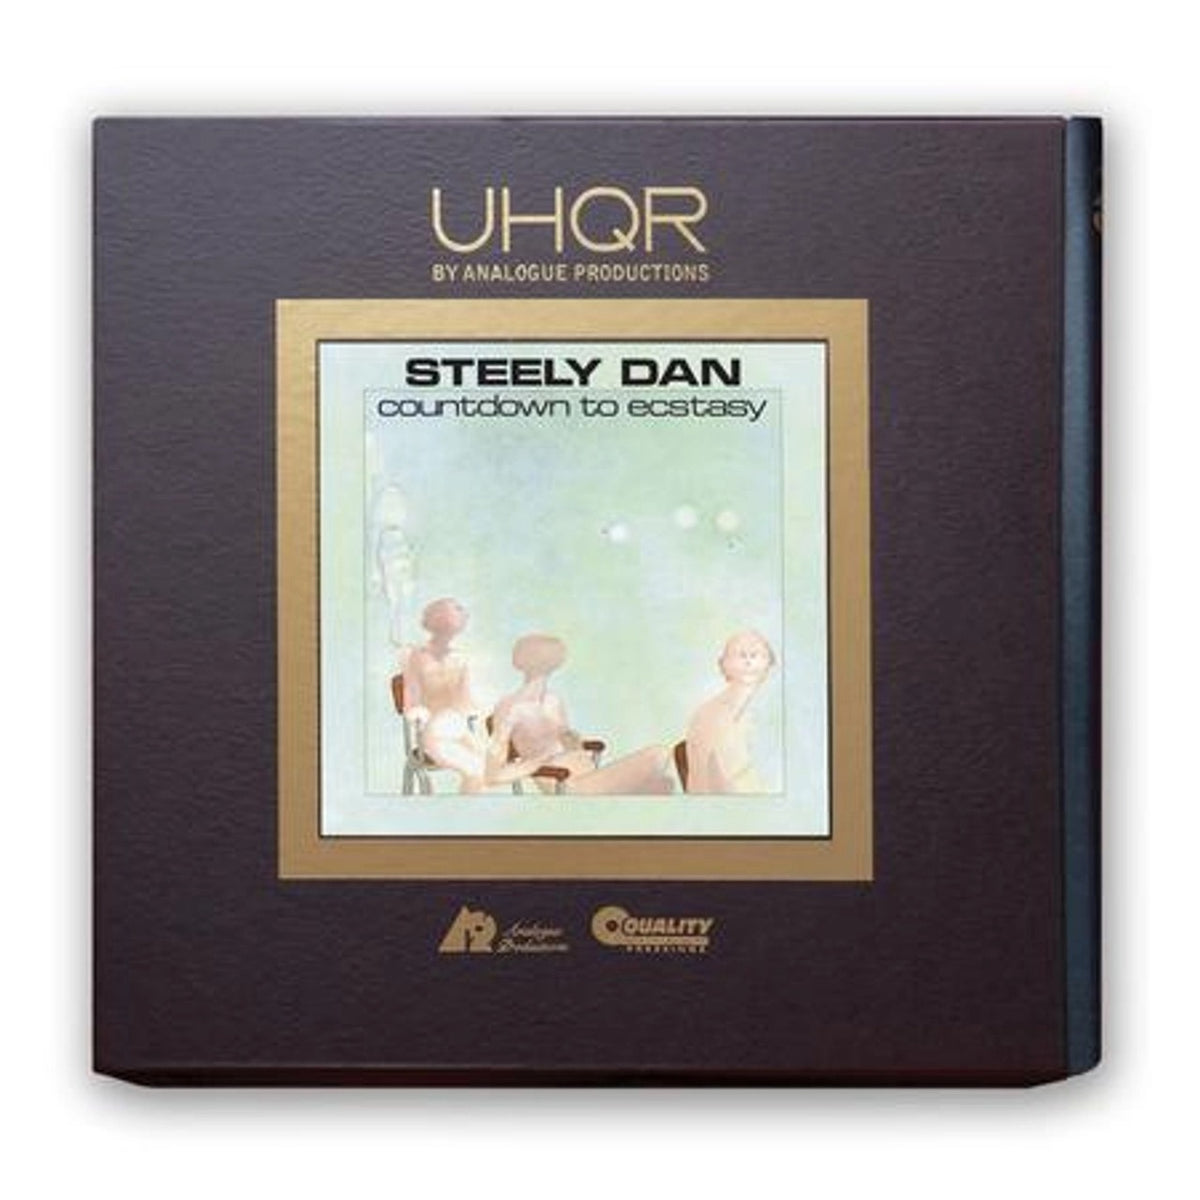 Steely Dan - Countdown To Ecstasy 2LP (Analogue Productions UHQR Box Set, 45rpm Clarity Vinyl)